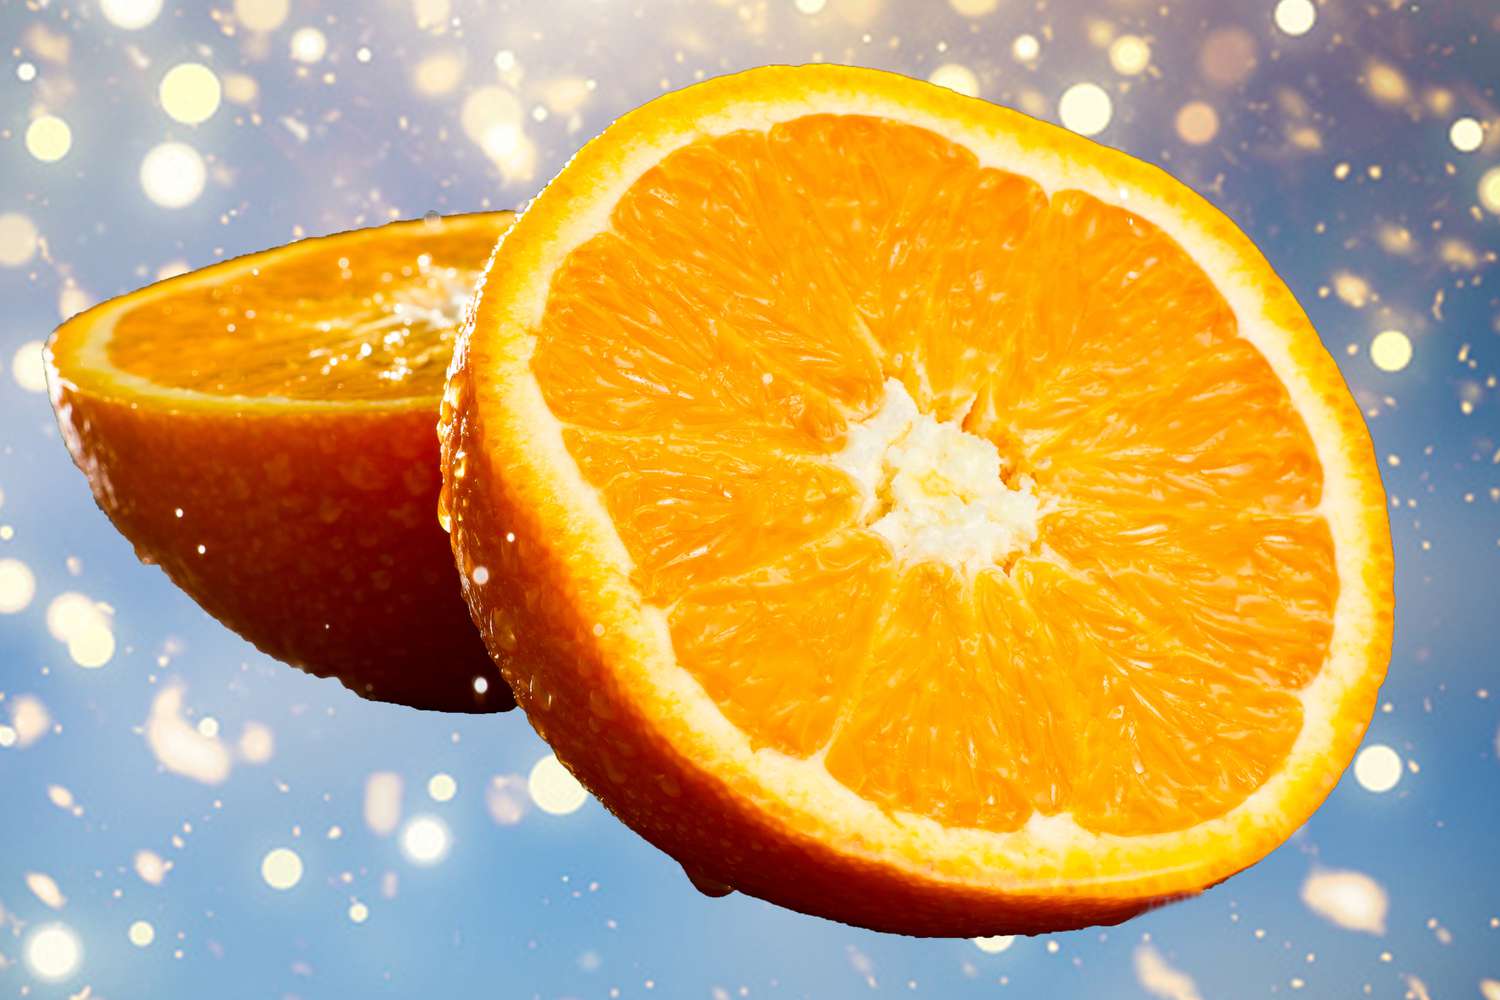 I'm a Dietitian And Here's What I Think About Eating an Entire Orange—Skin and All—to Help You Instantly Poop